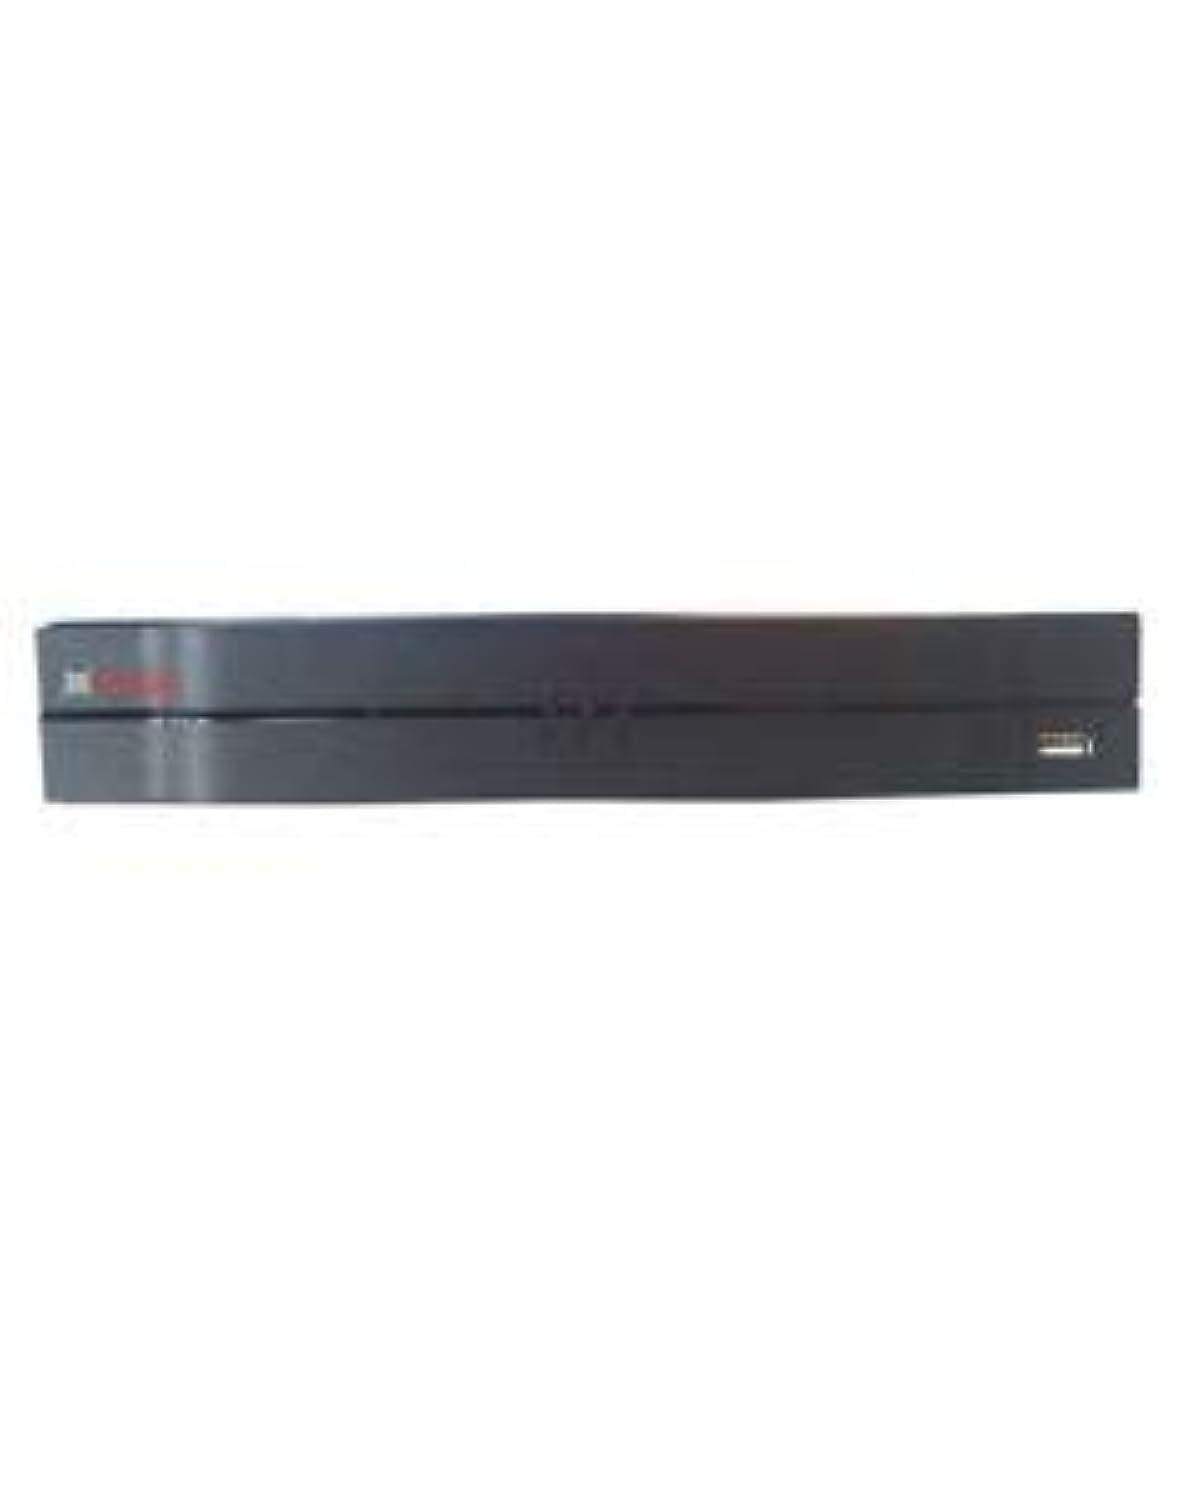 CP PLUS 16 Channel 8 MP Network Video Recorder NVR CP-UNR-4K2161-V2 1 Pc.